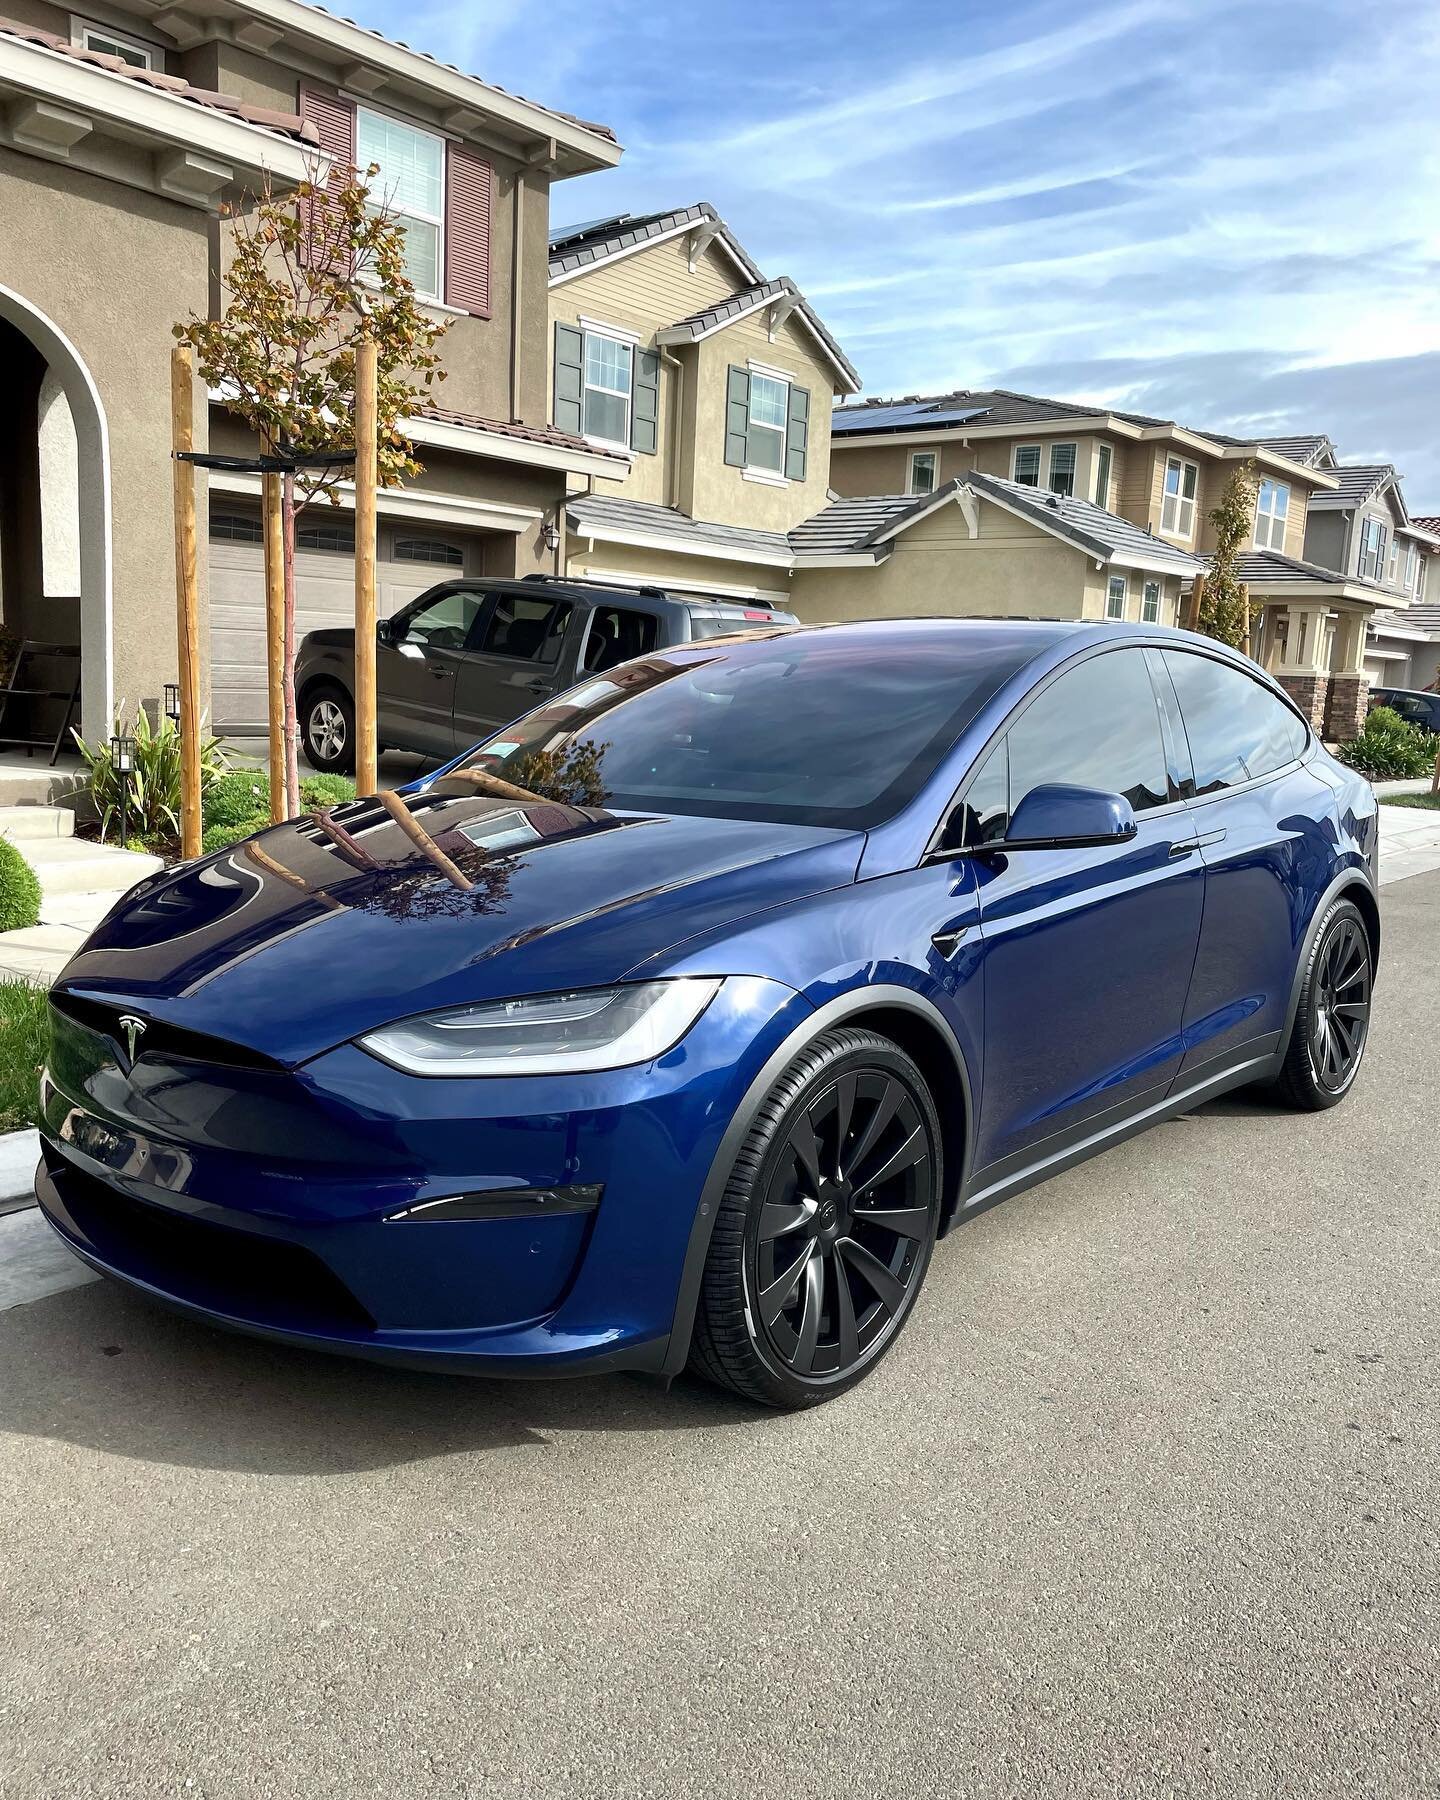 A full week of work with this Tesla Model X! We performed a full body PPF on this car, along with @adamspolishes 7-9 Year Graphene Ceramic Coating on the windows, wheels, &amp; the trim pieces. The interior leather was coated &amp; the inner windows 